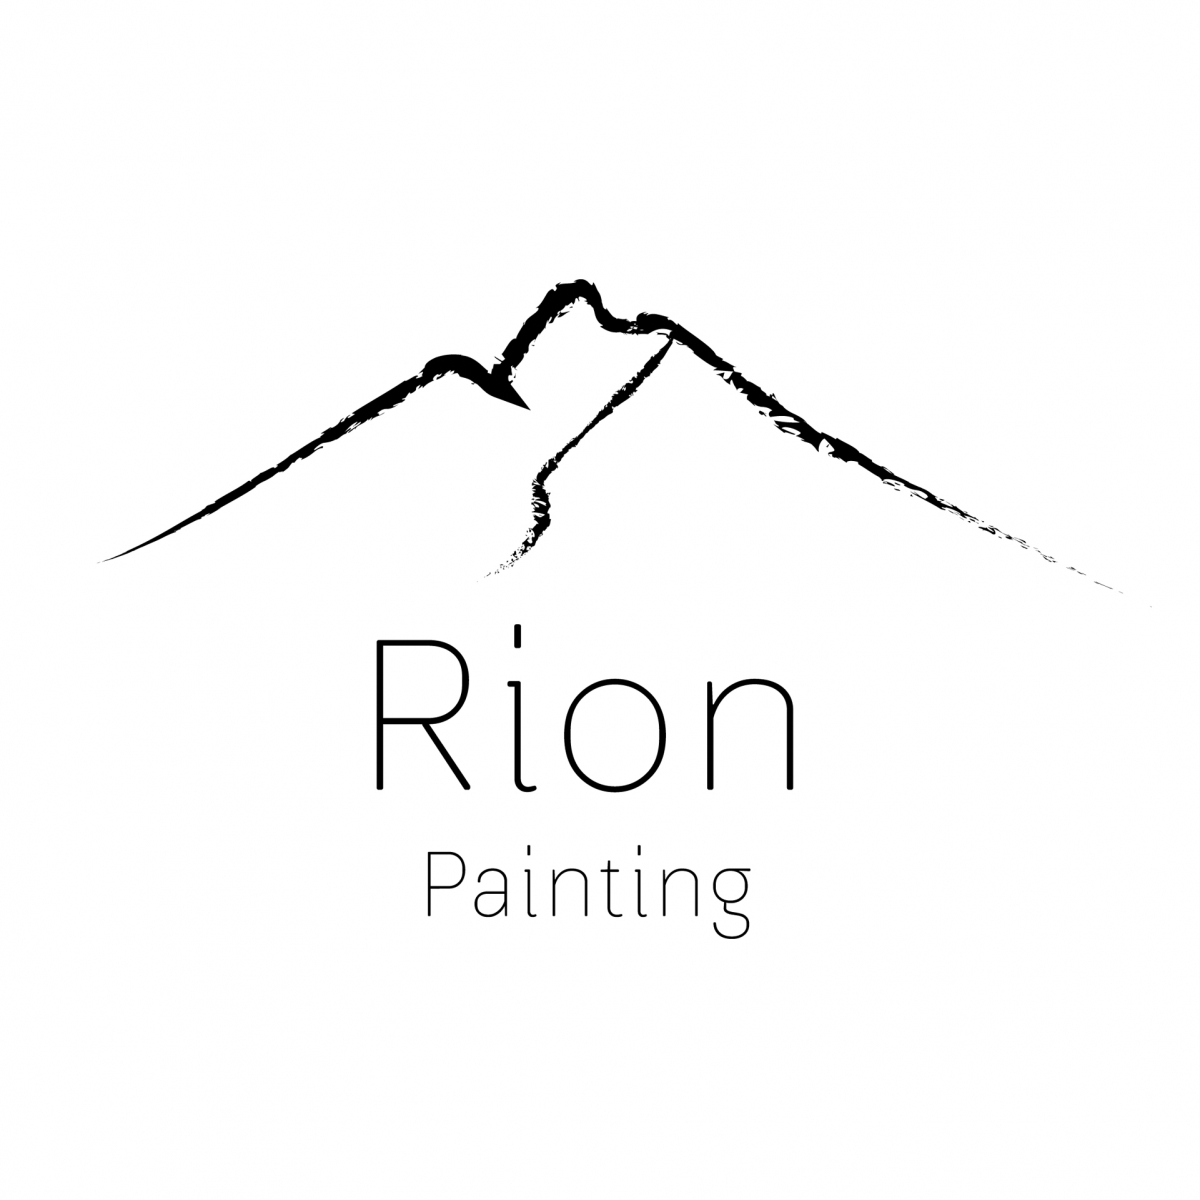 Rion paintings